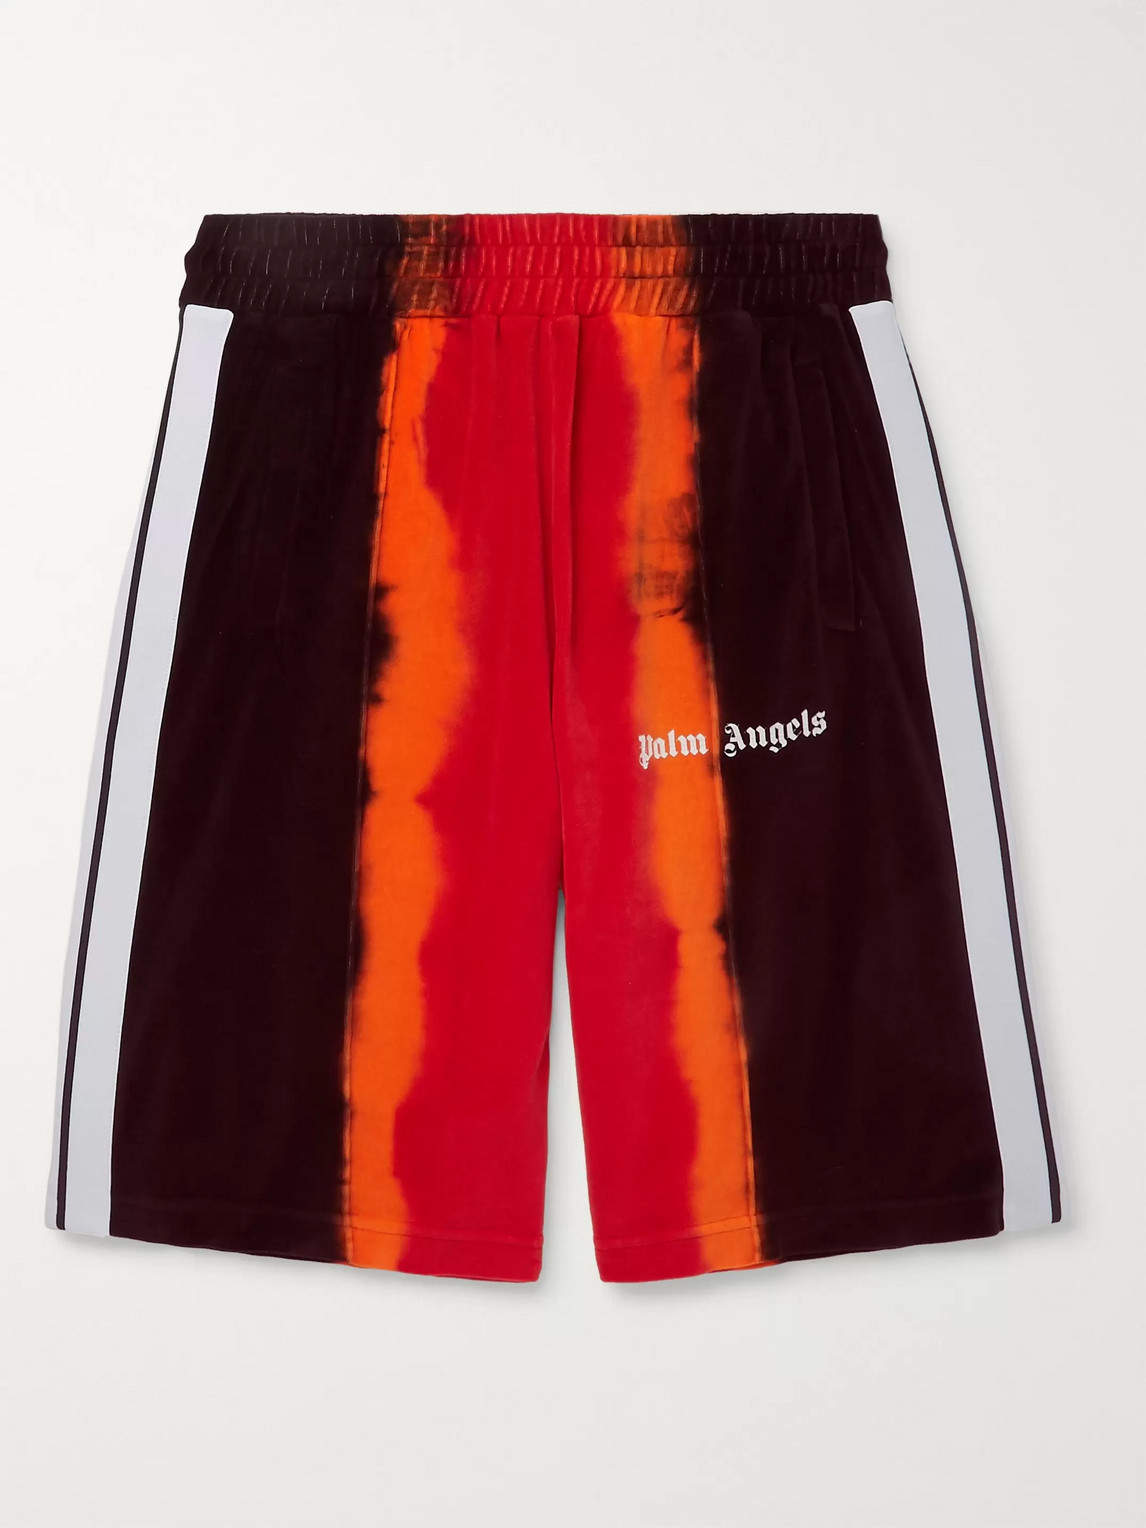 PALM ANGELS STRIPED TIE-DYED COTTON-BLEND VELOUR SHORTS